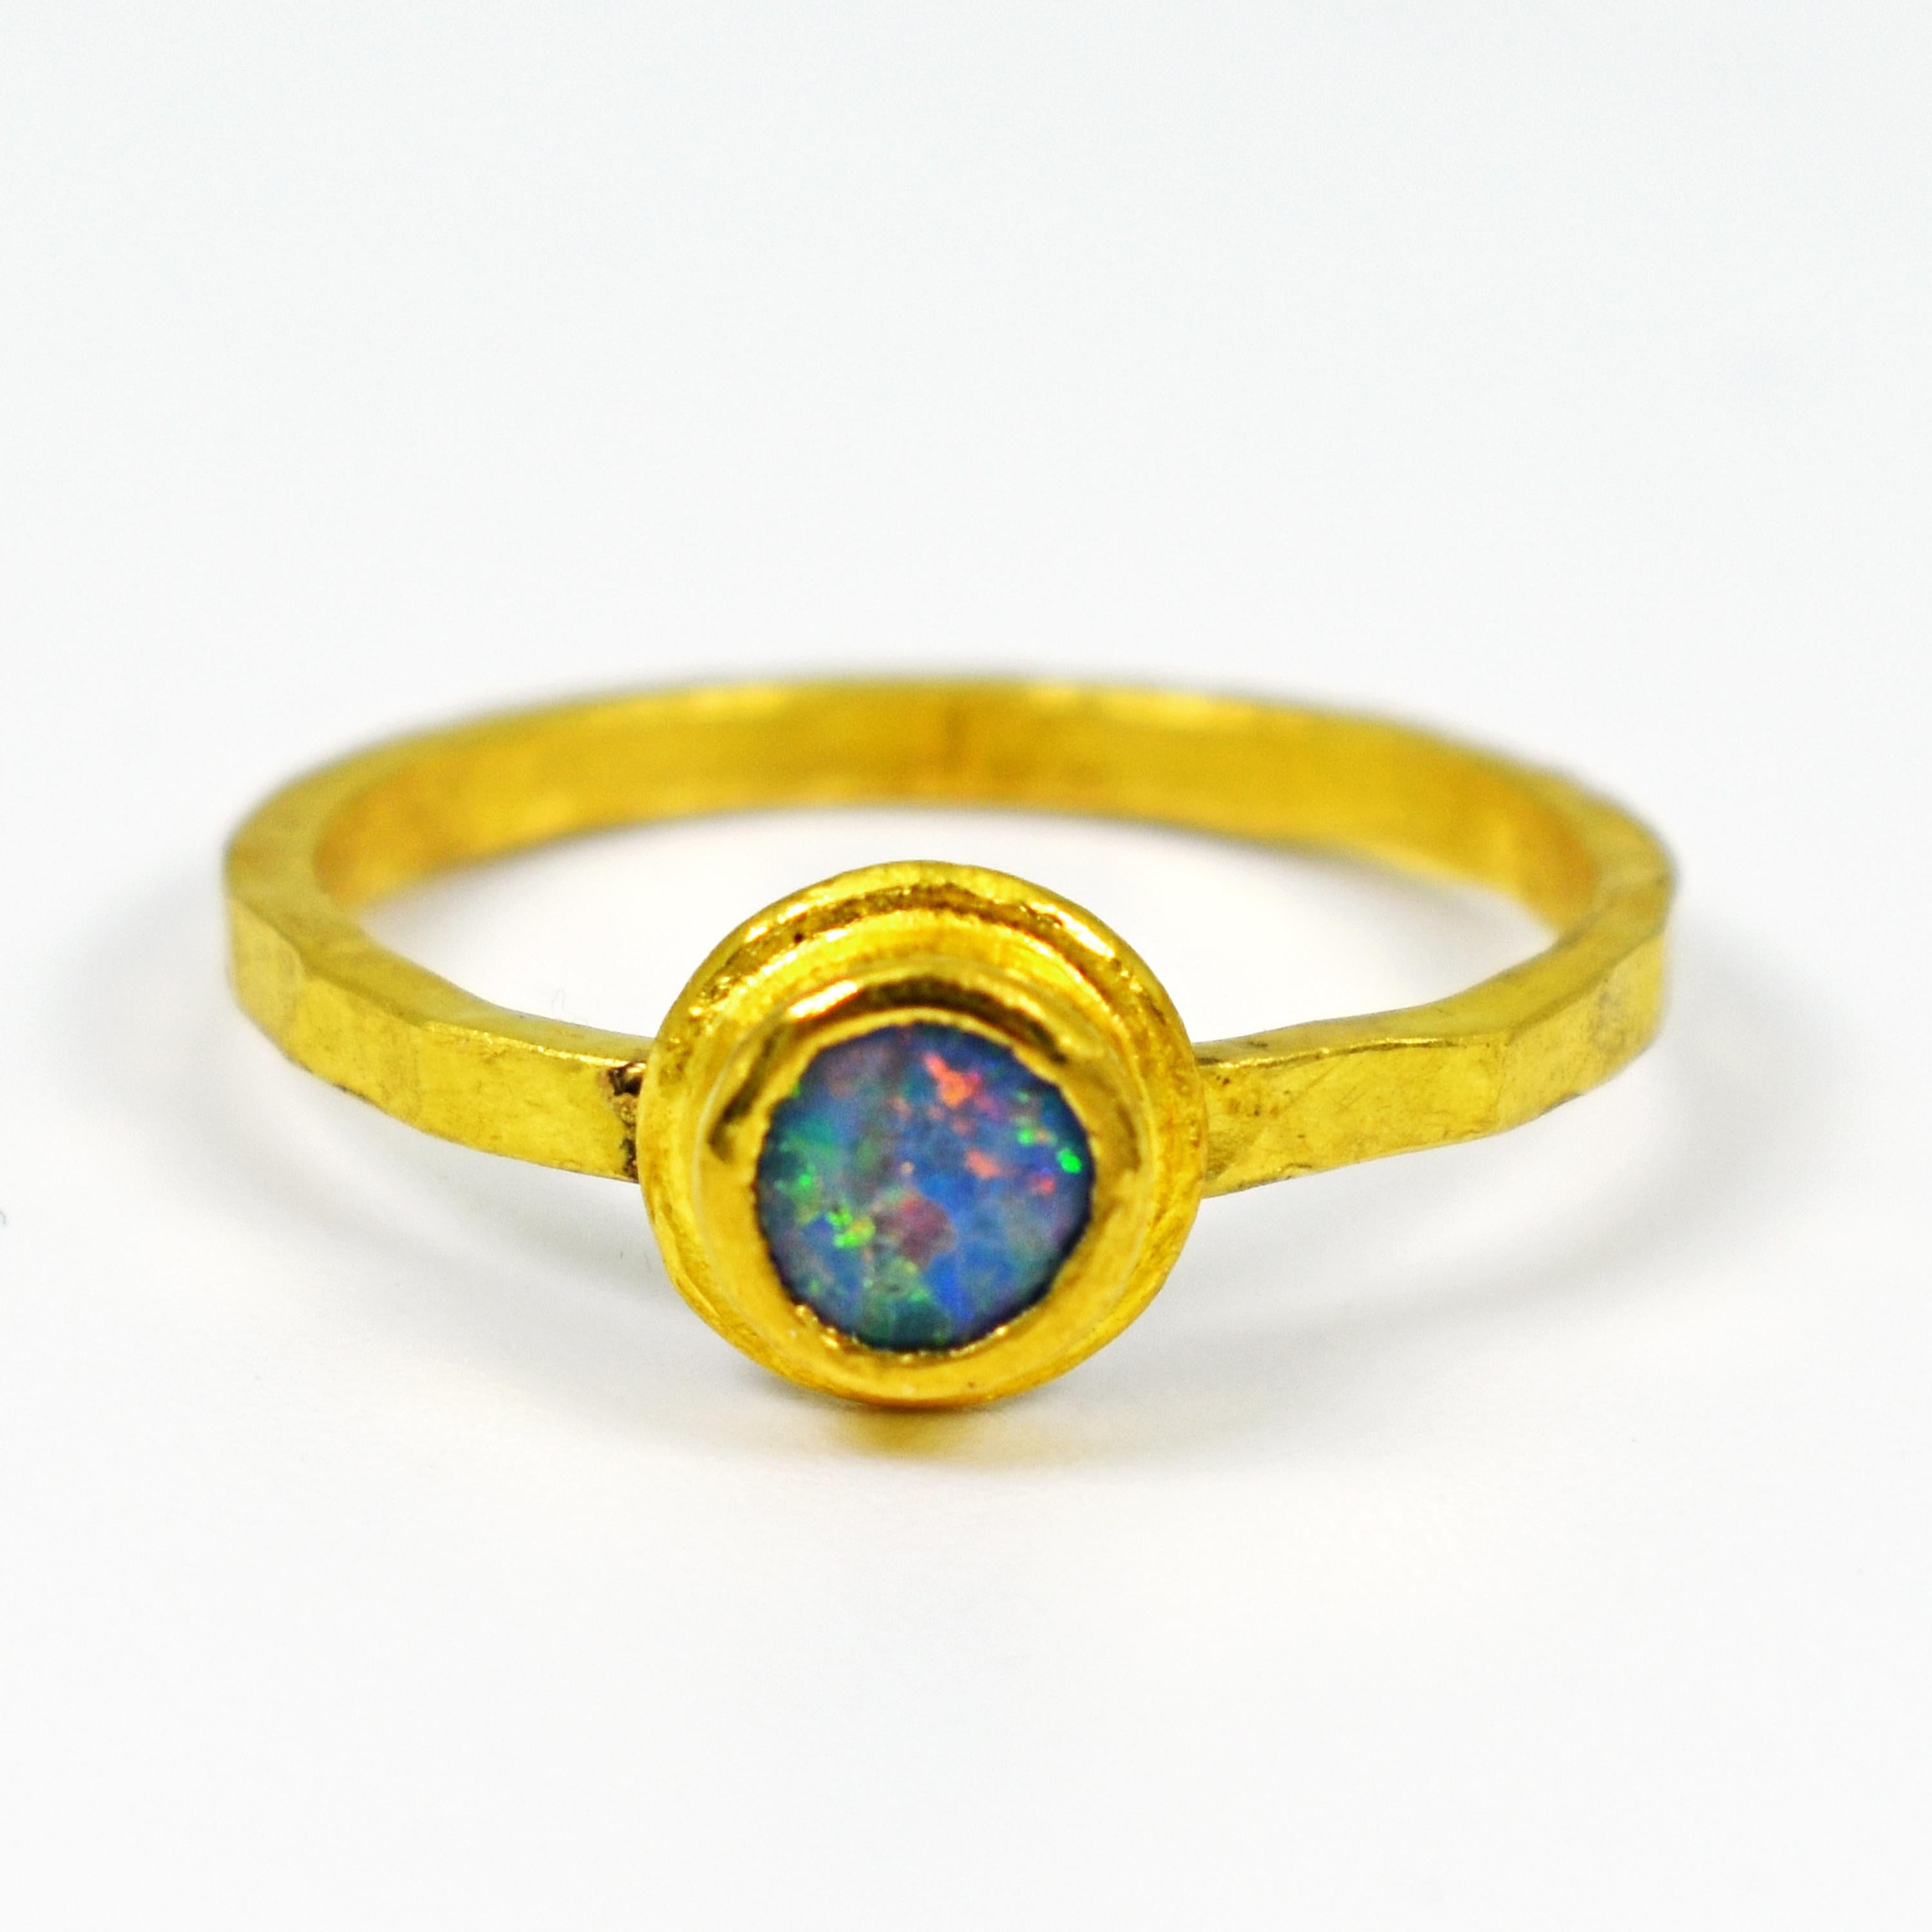 Blue Opal 22 Karat Gold Bezel Stacker Fashion Ring In New Condition For Sale In Naples, FL